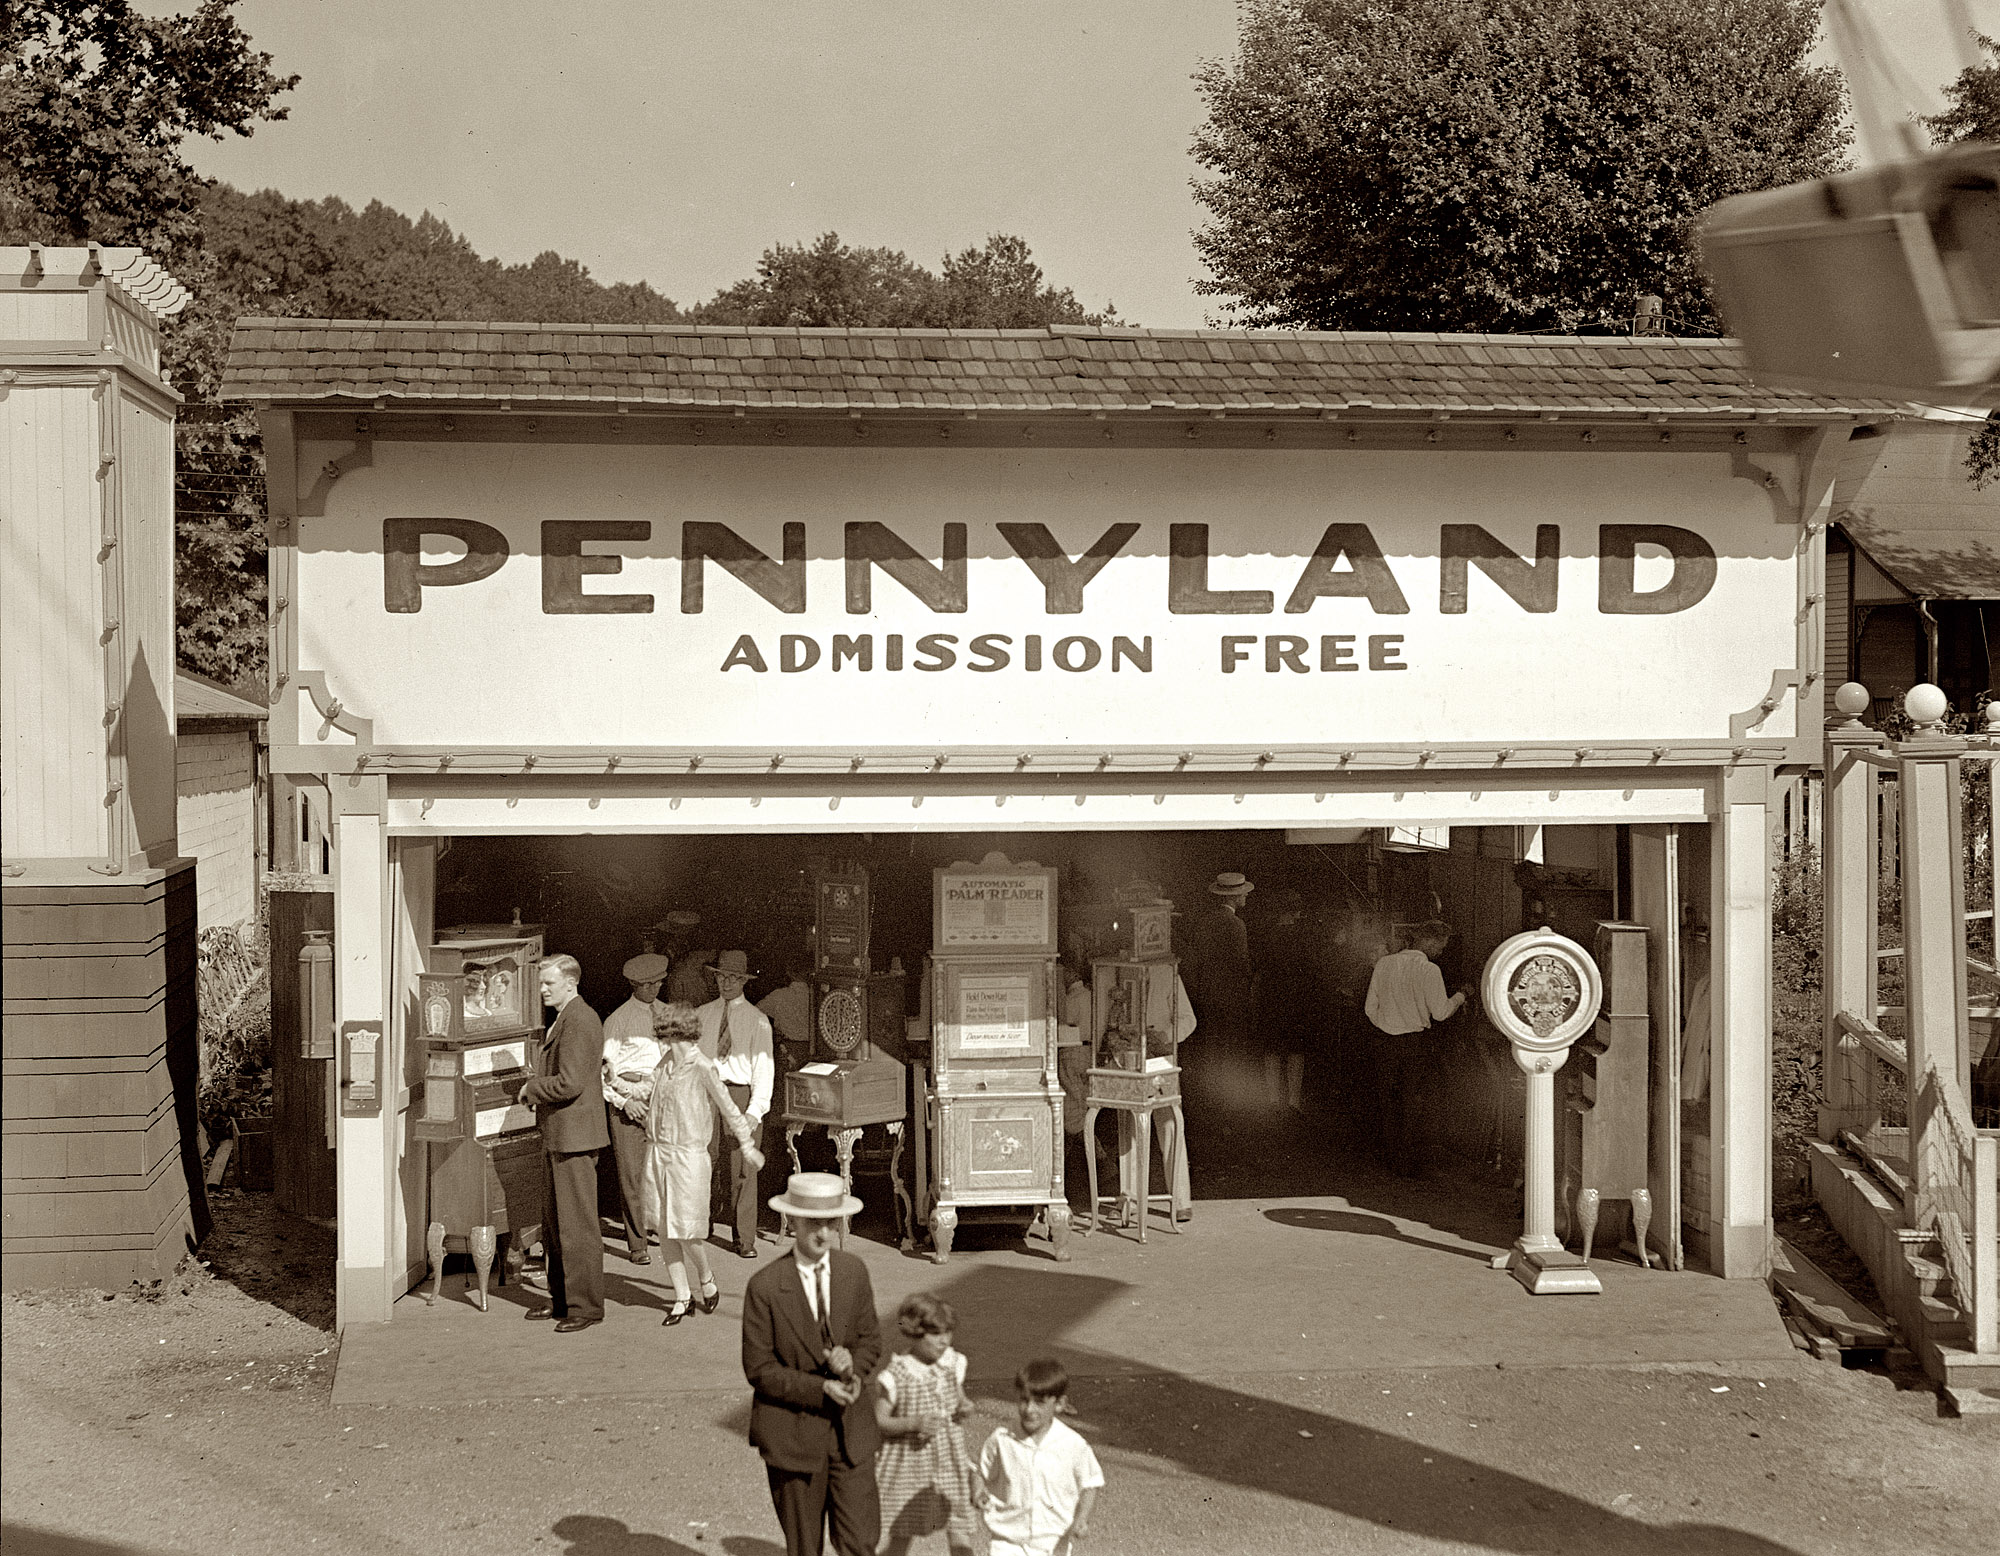 1928. At the Glen Echo amusement park in Montgomery County, Maryland, near Washington. View full size. National Photo Company Collection.